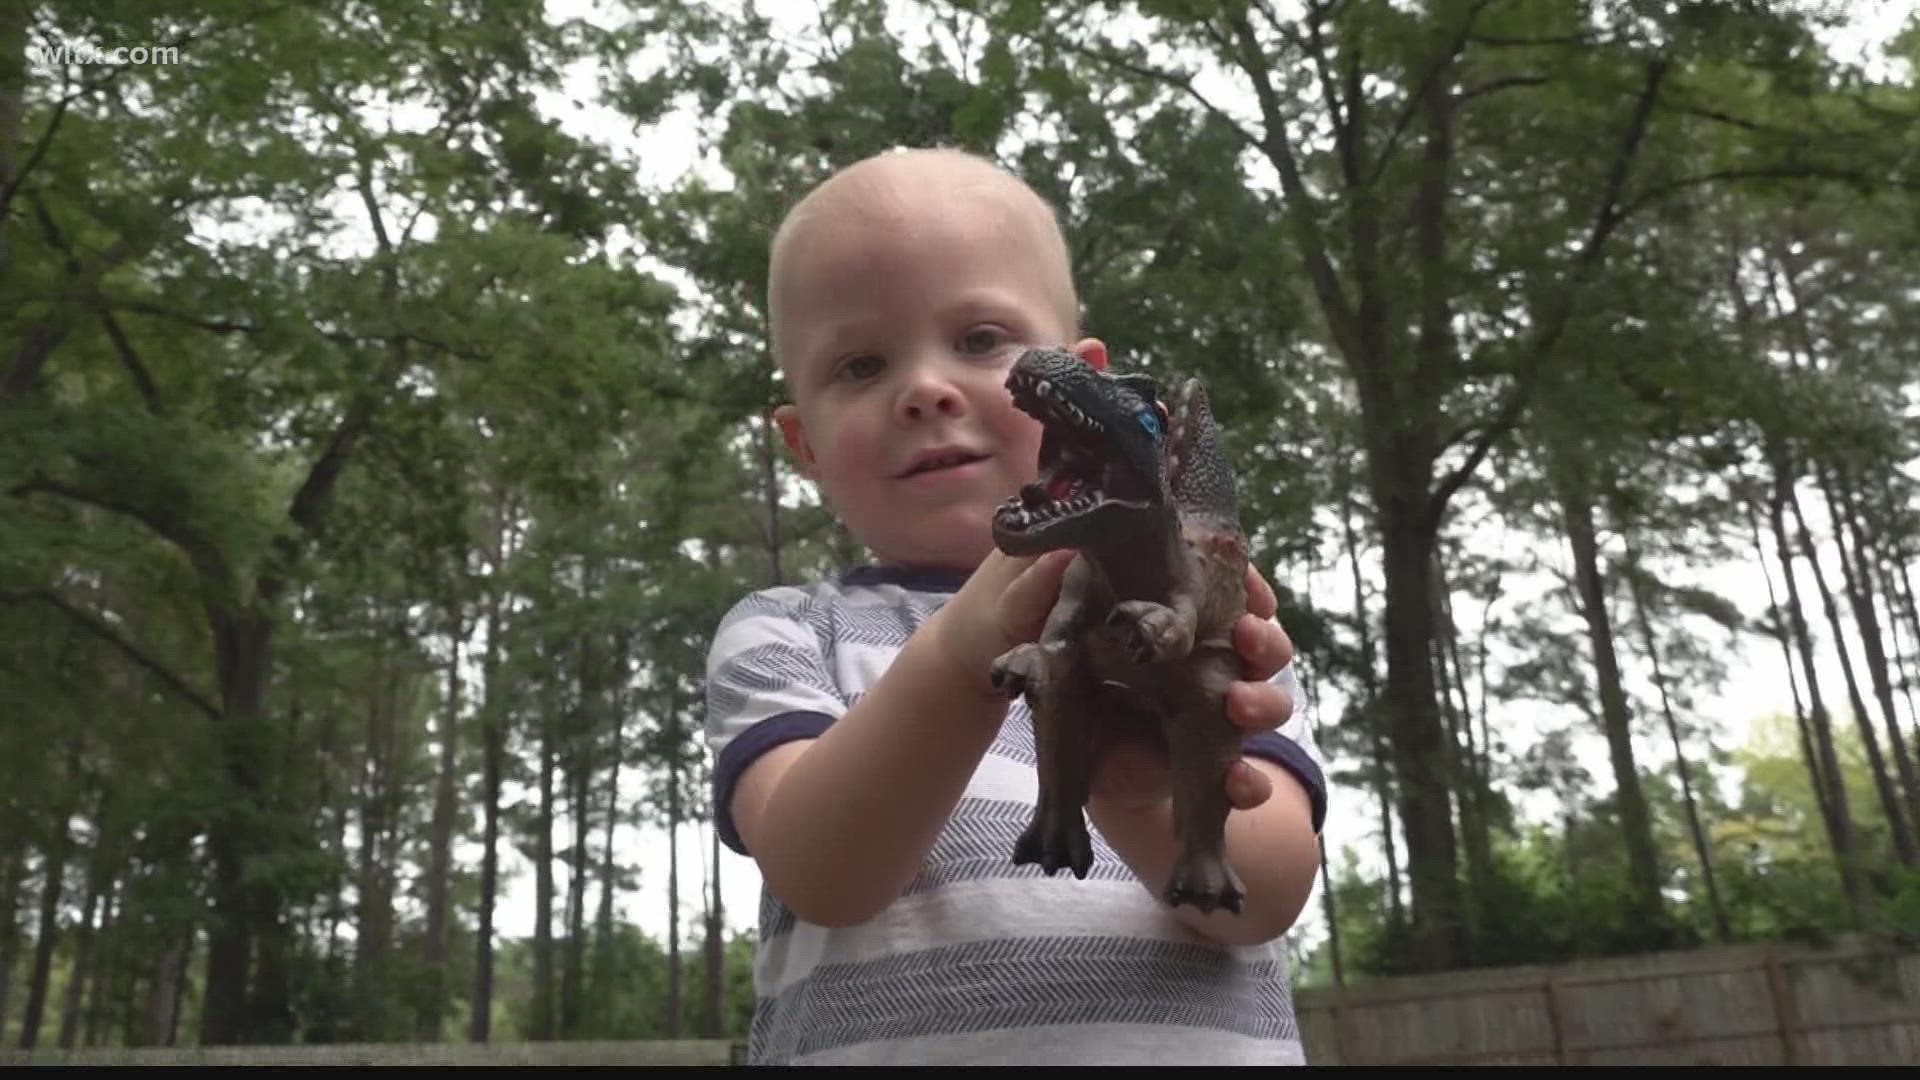 The South Carolina highway patrol is building playsets for children fighting cancer.